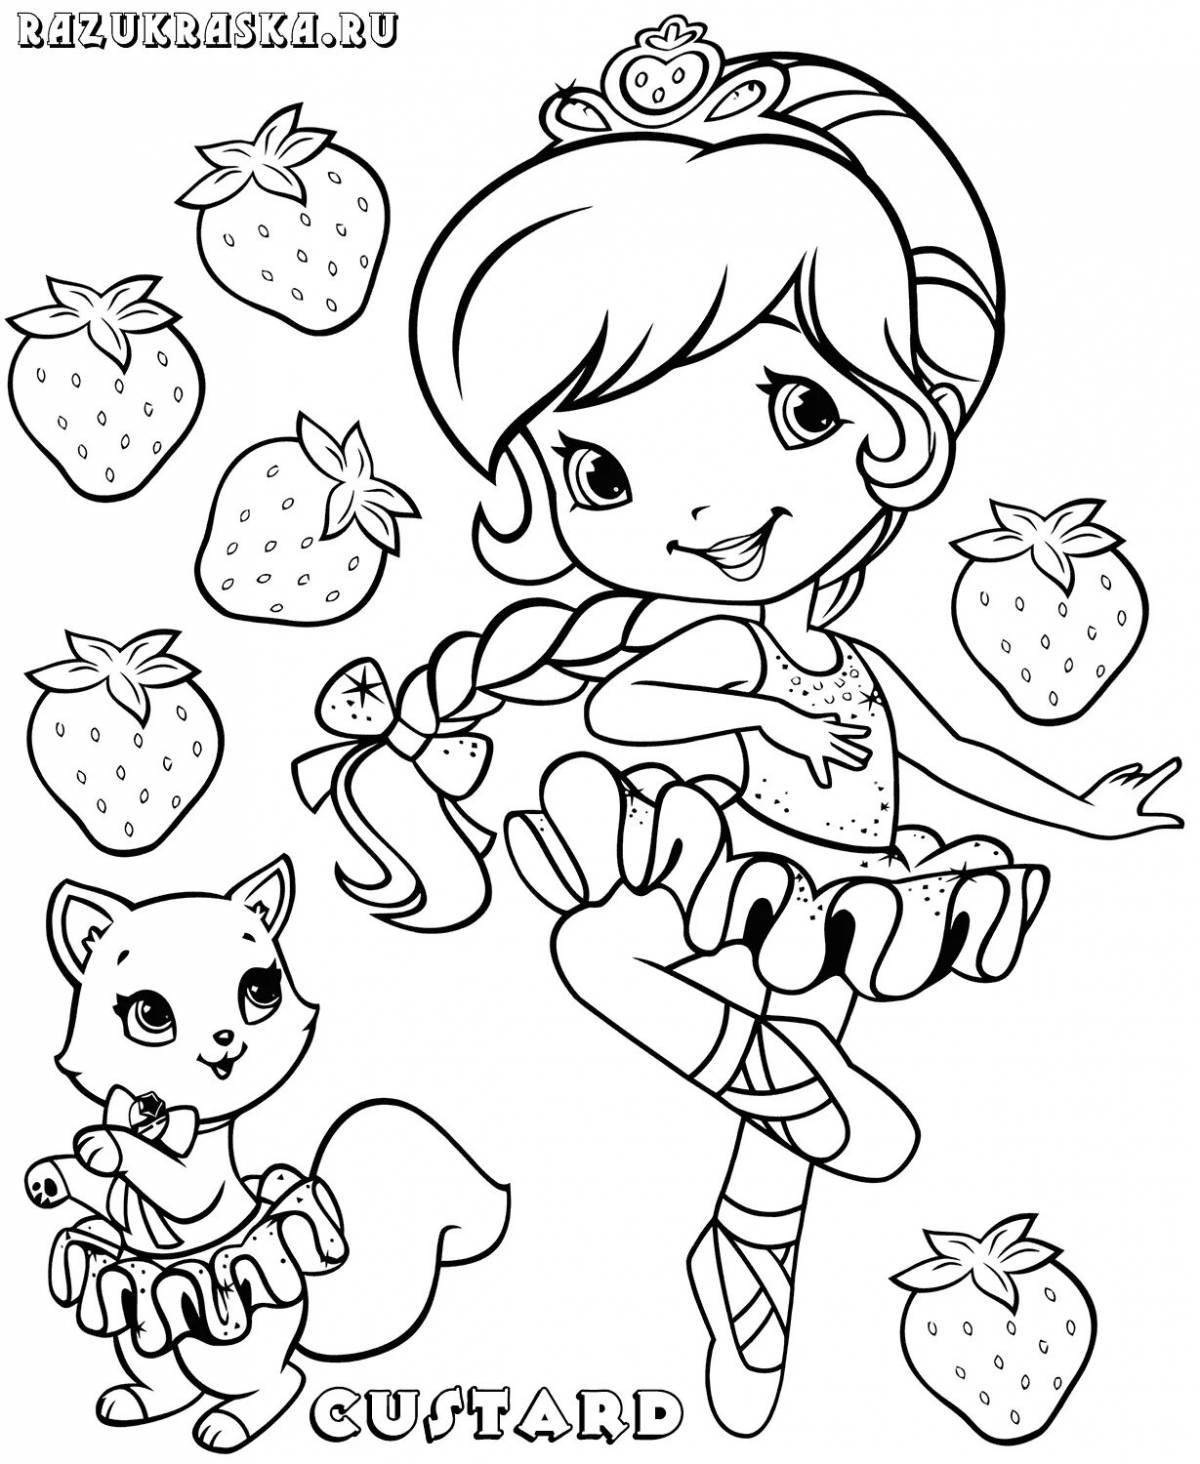 Magic strawberry coloring book for girls